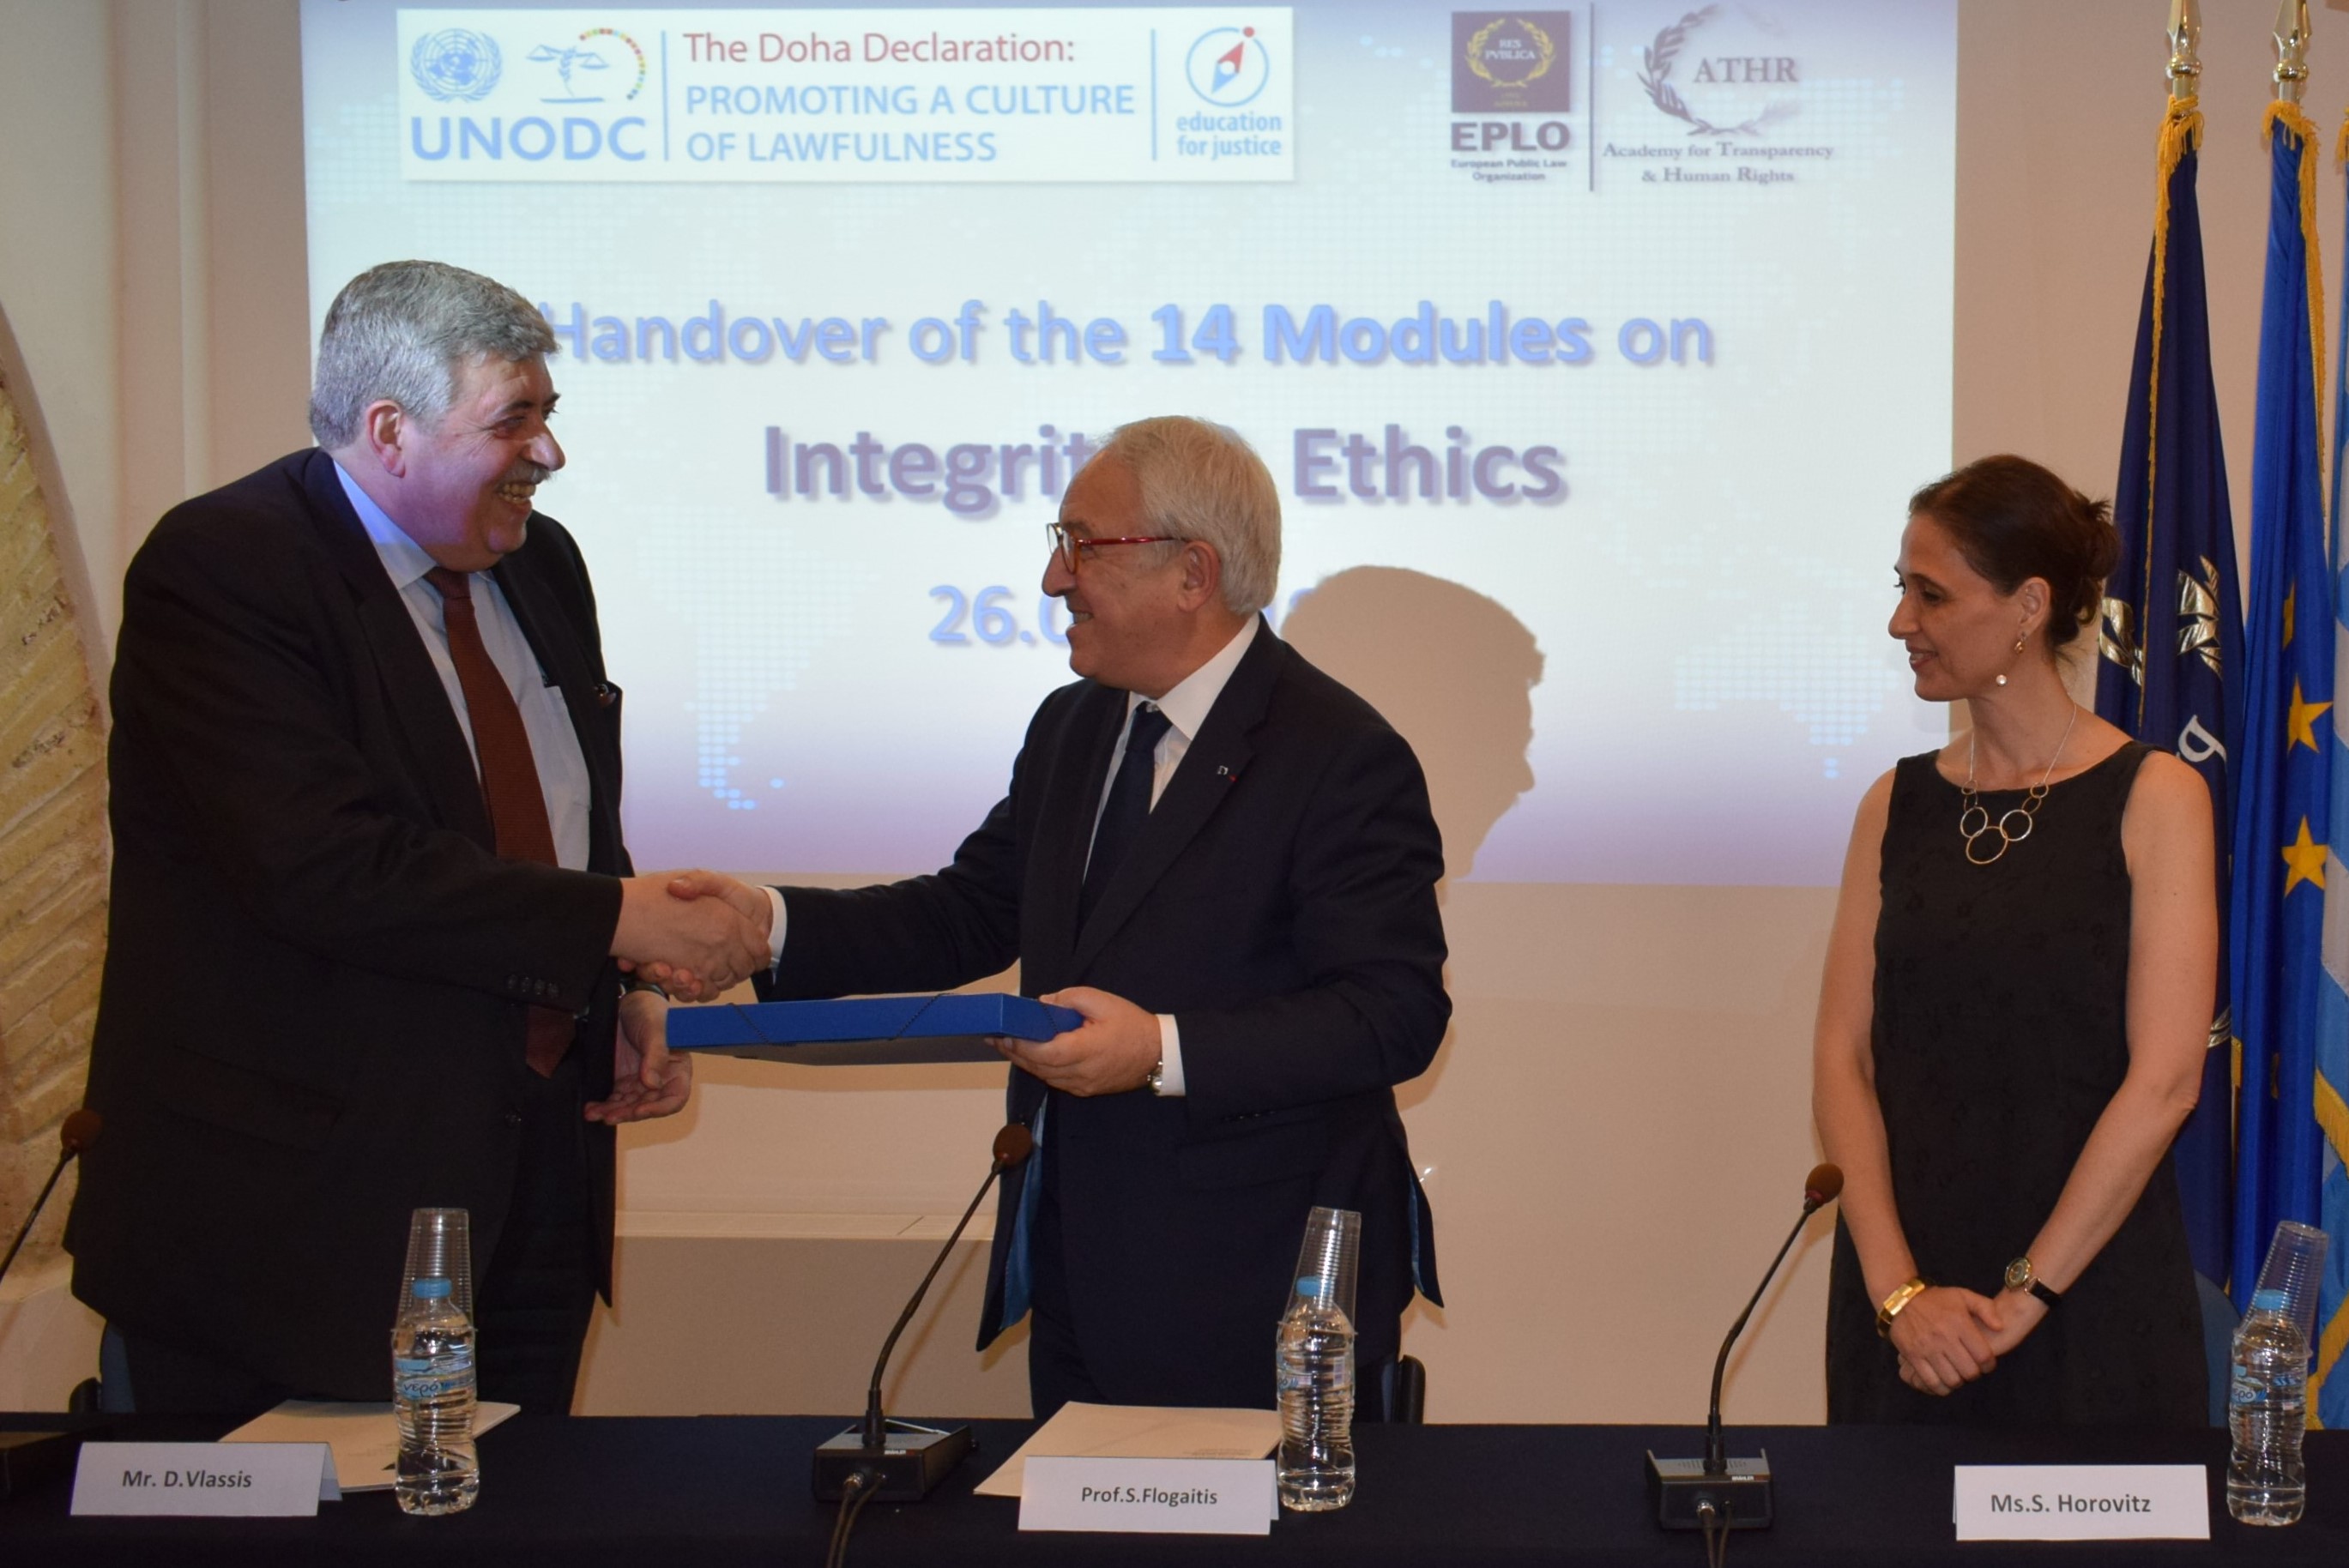 Strengthening global integrity and ethics: UNODC finalizes series of new university modules under the Education for Justice initiative